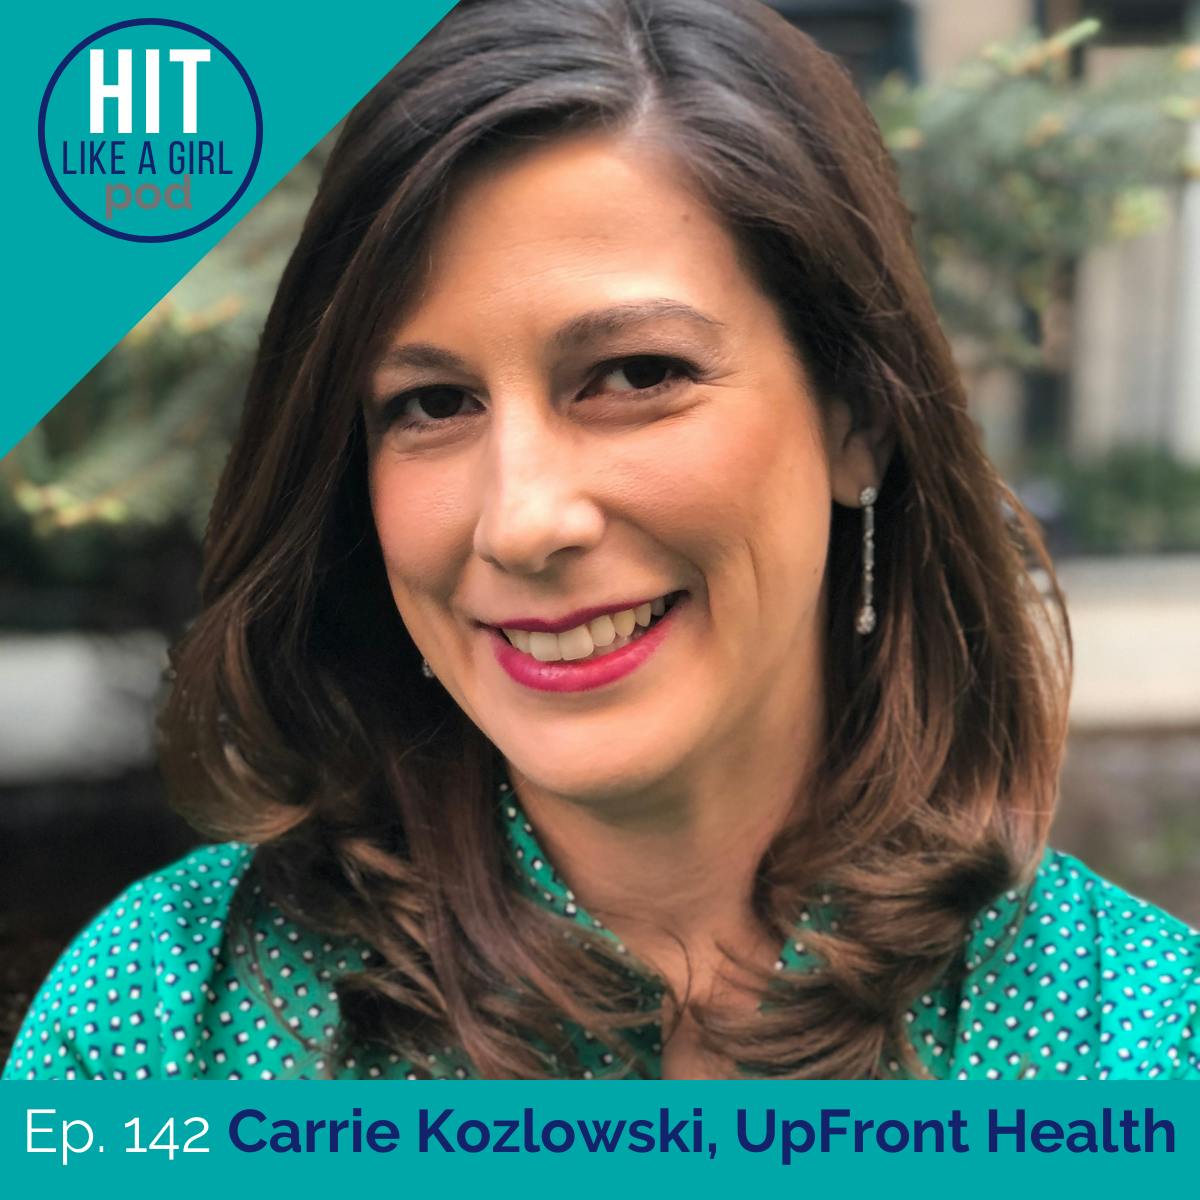 Carrie Kozlowski Uses the Science of Health Communication to Activate Patients